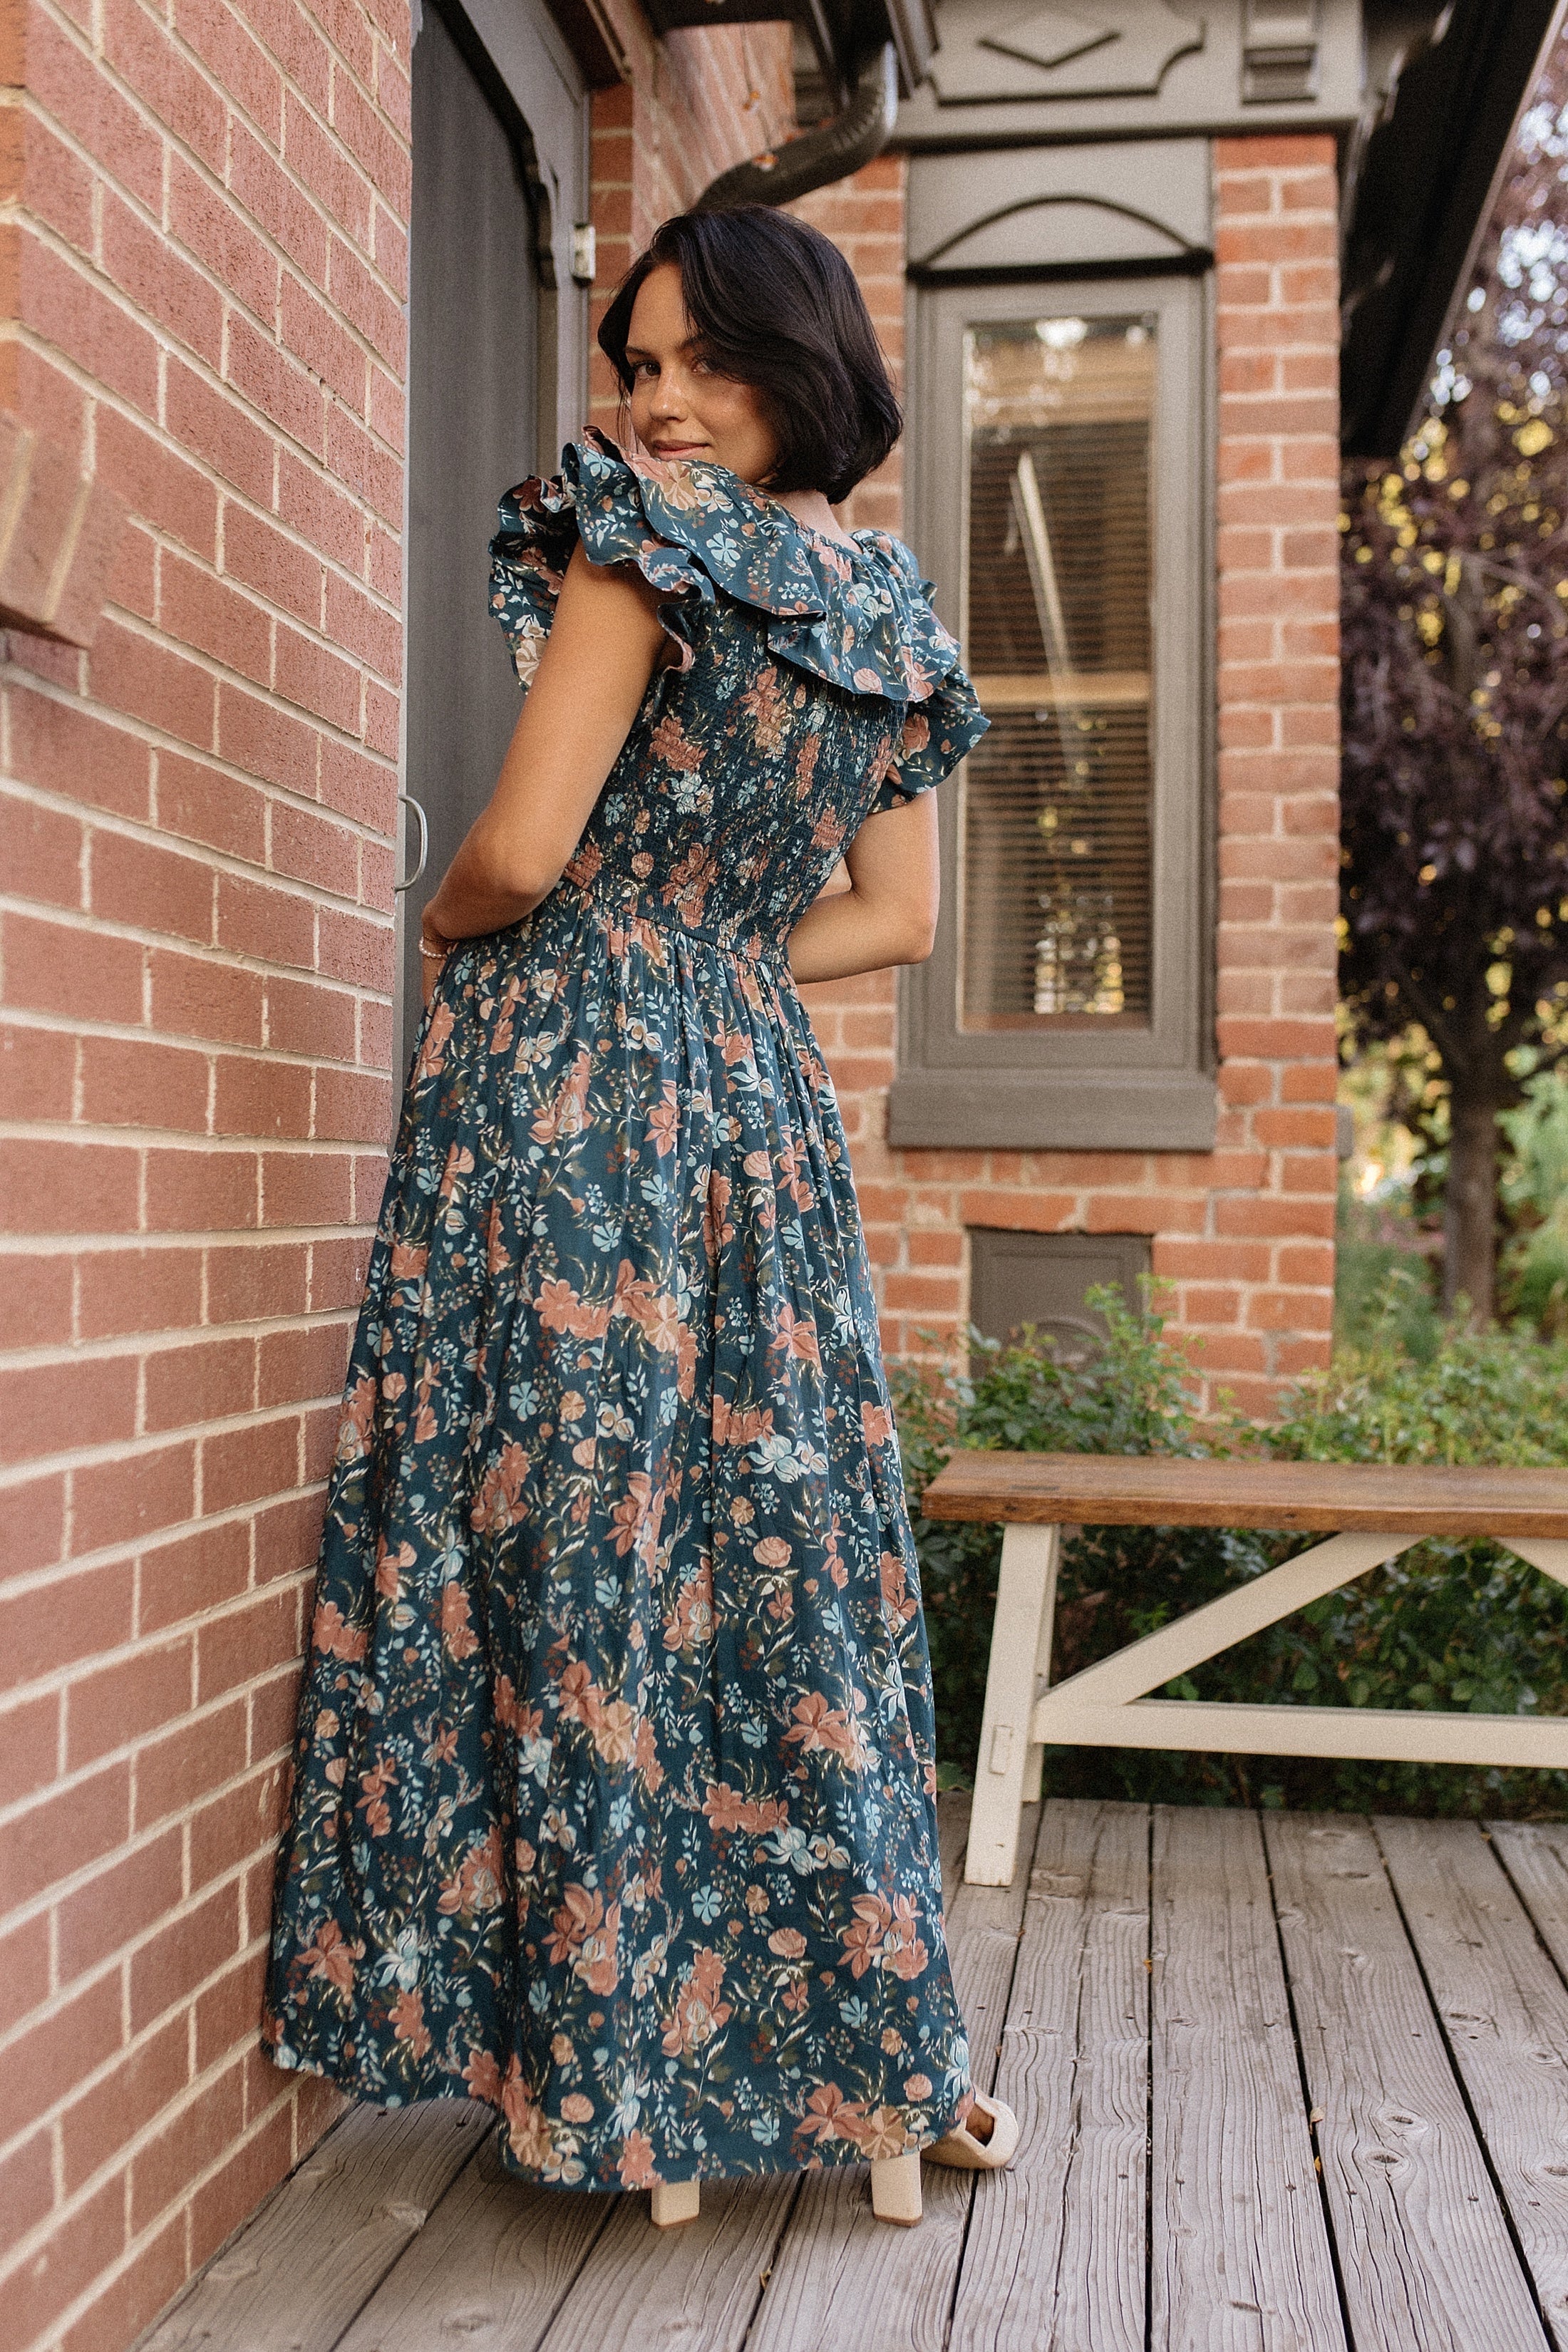 Stockplace The Label- The Autumn Harvest Dress